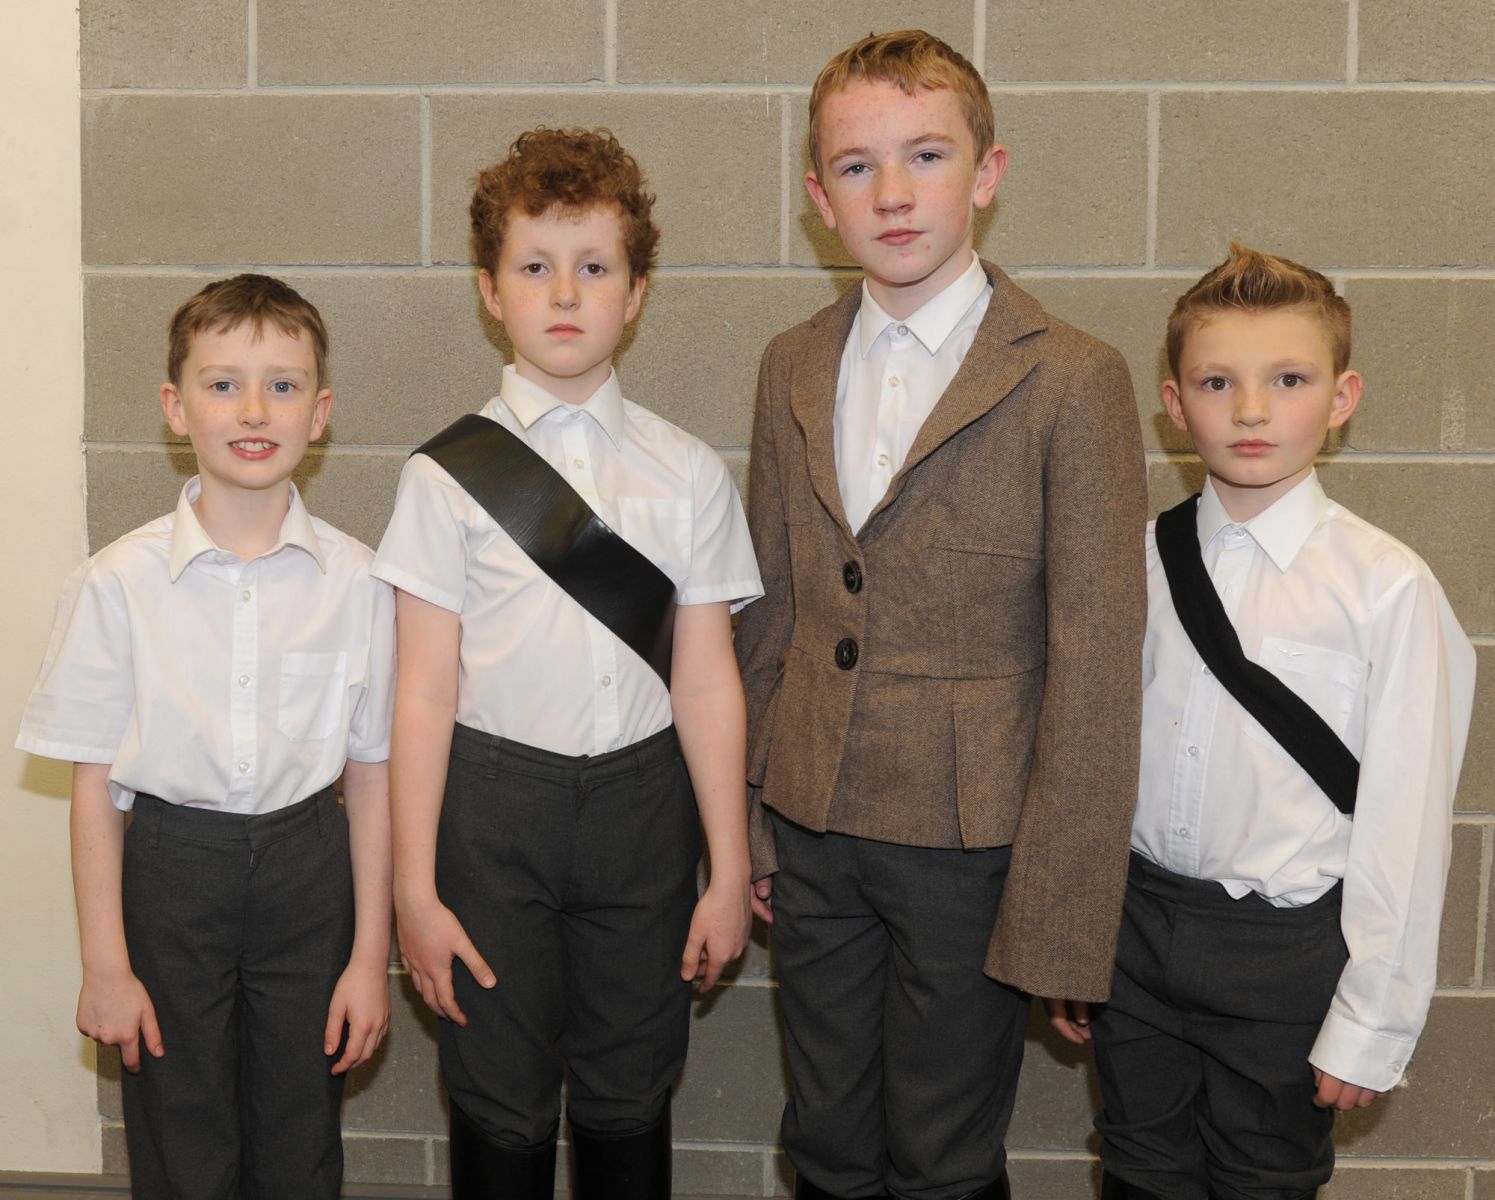 Jude Martindale, Calum Tooher, Liam Brady and A.J. Linnane who were cast members in the Musical 'The Sound of Music' at Dundalk Grammar Junior School. Photo: Aidan Dullaghan/Newspics